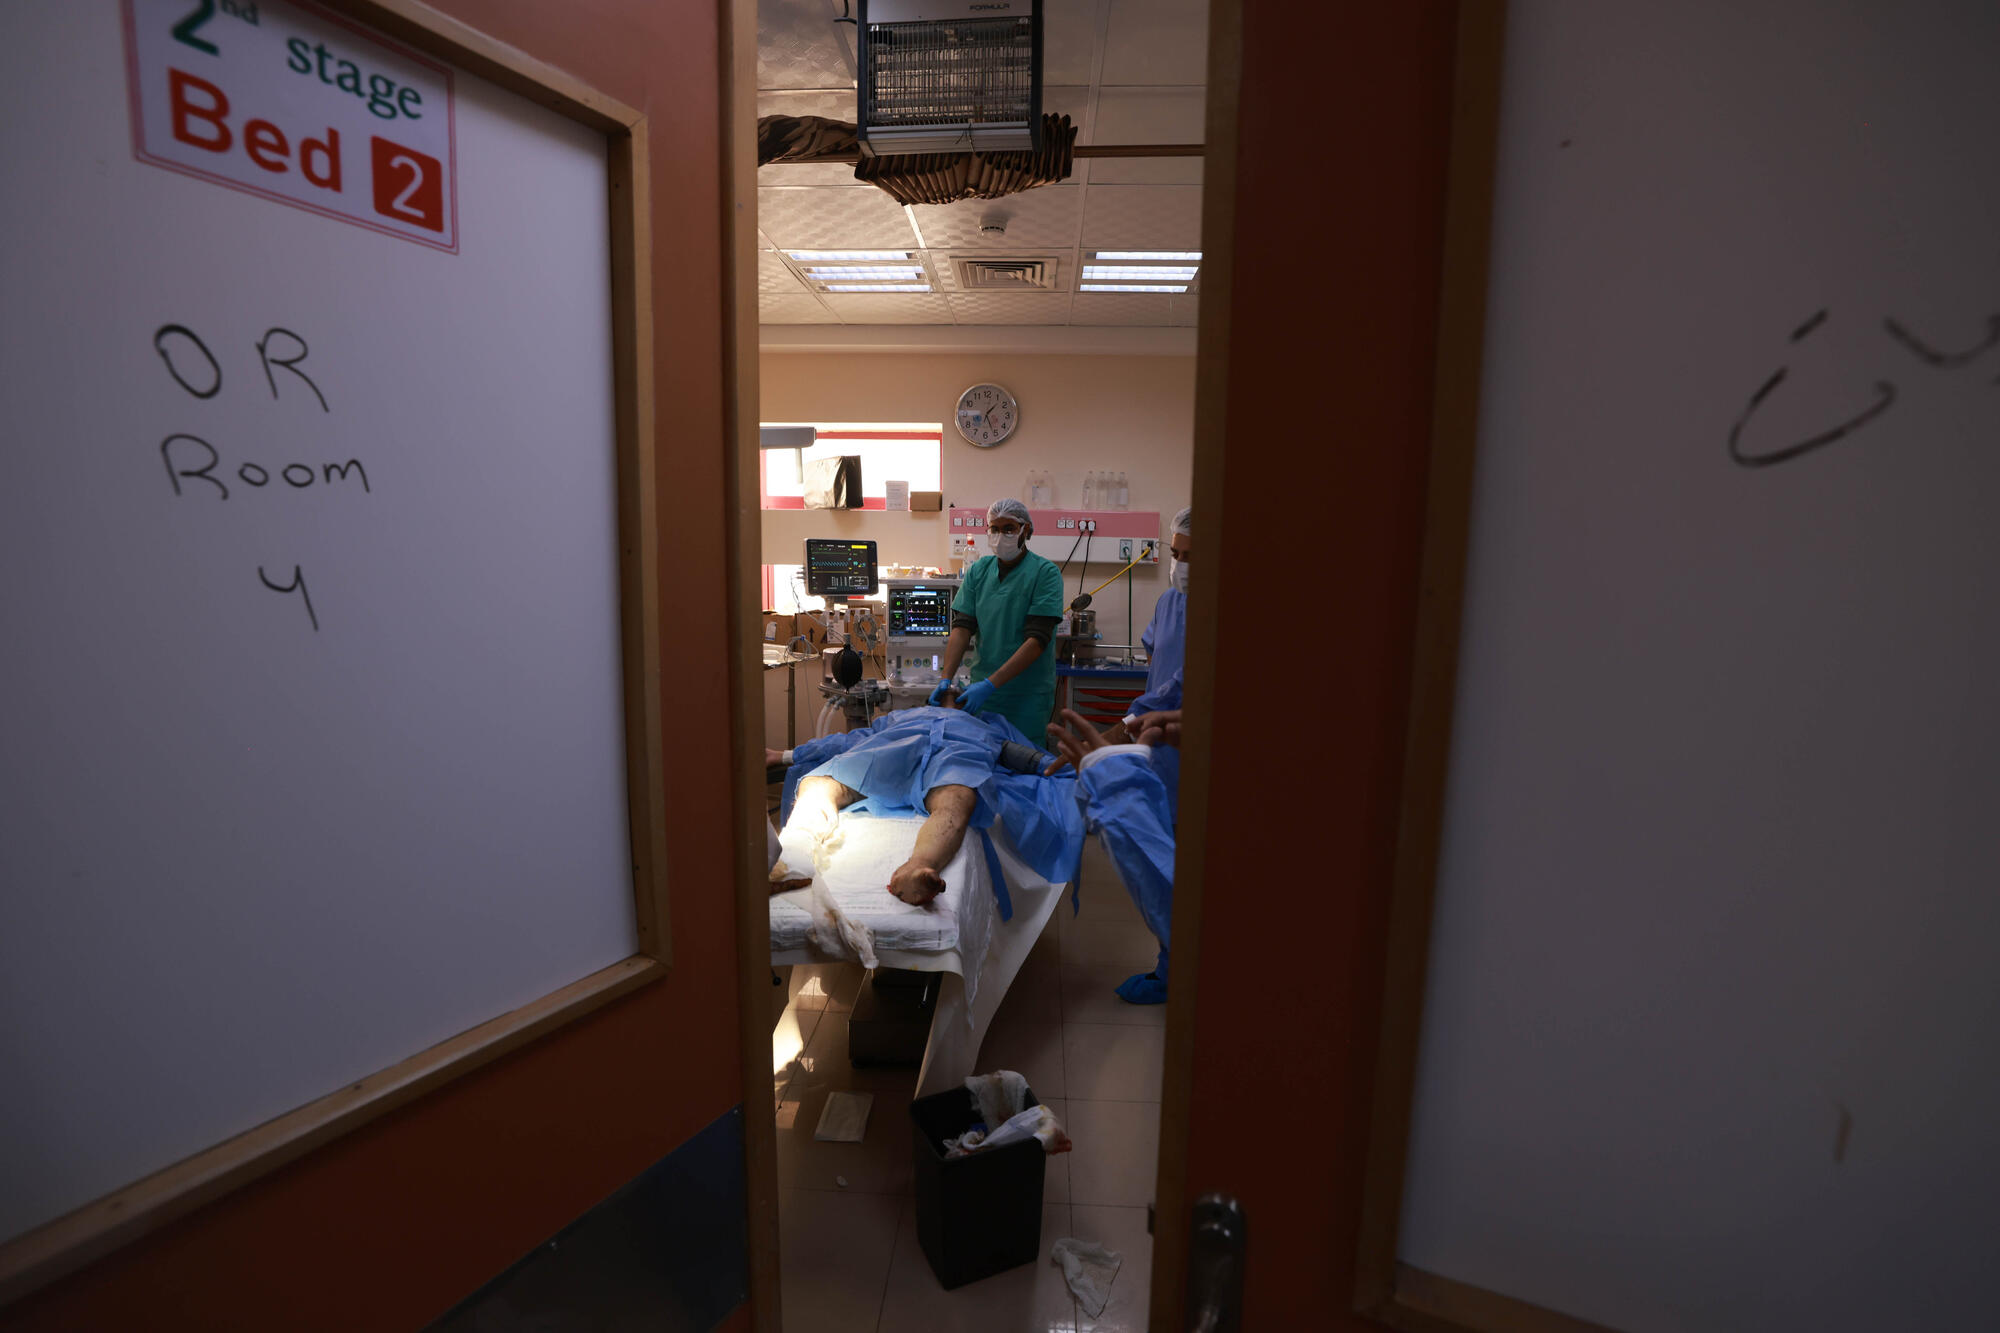 Open door to an operating room at Al Aqsa Hospital in Gaza, as doctors perform surgery on a patient.